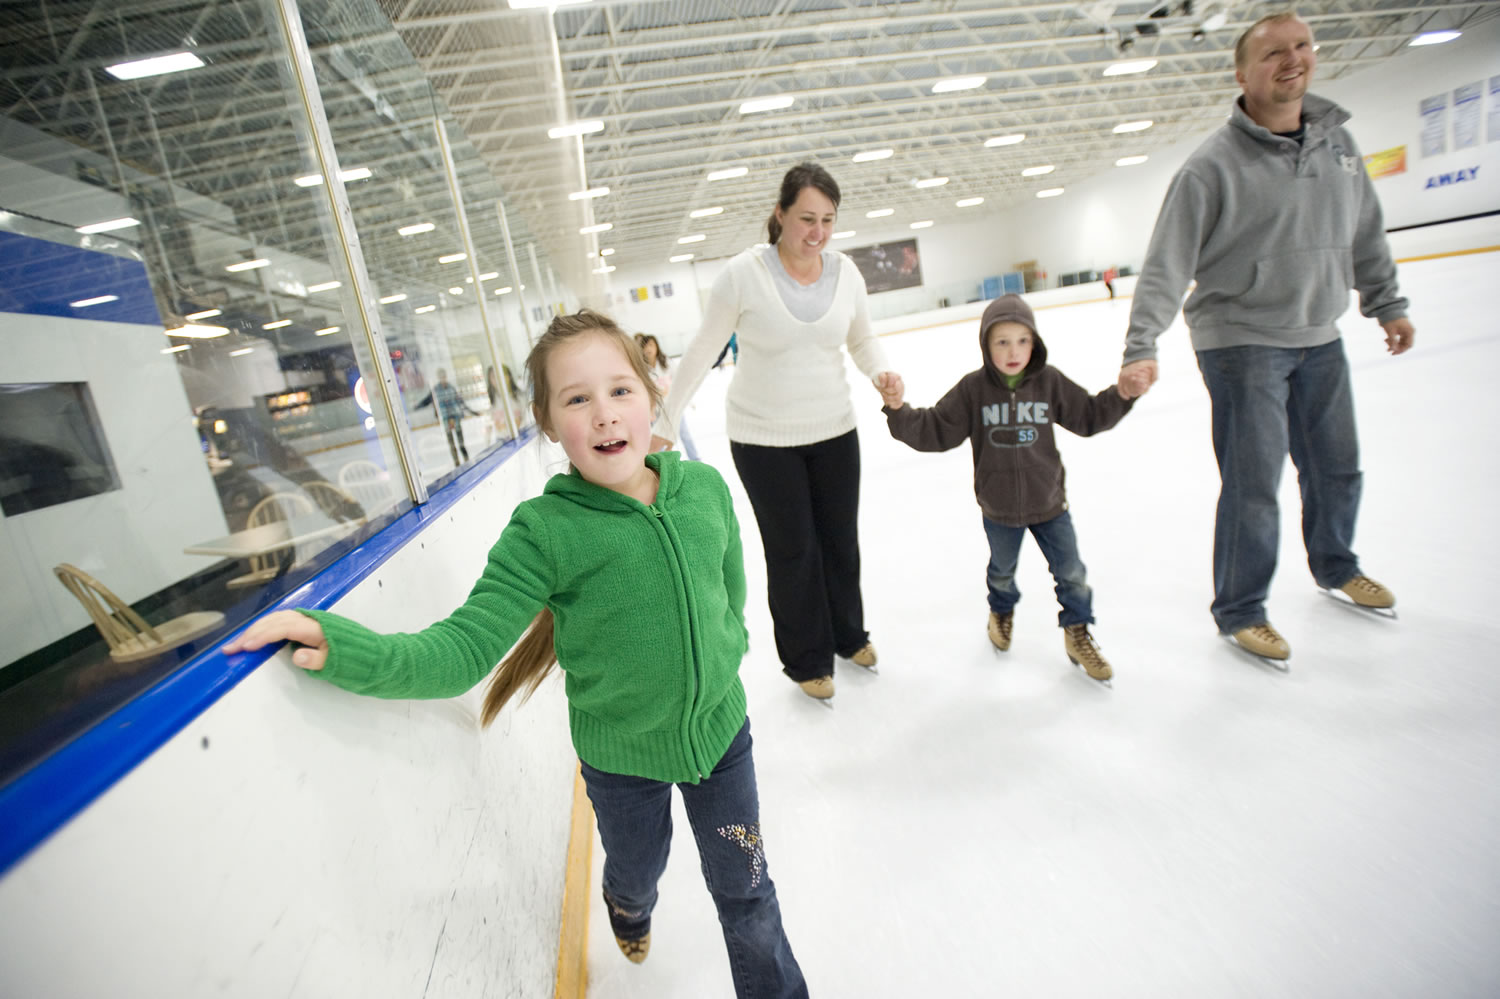 The Yamov family, from left, Christina, 7, Yuliya, Max, 5, and Nick skate at the Mountain View Ice Arena.